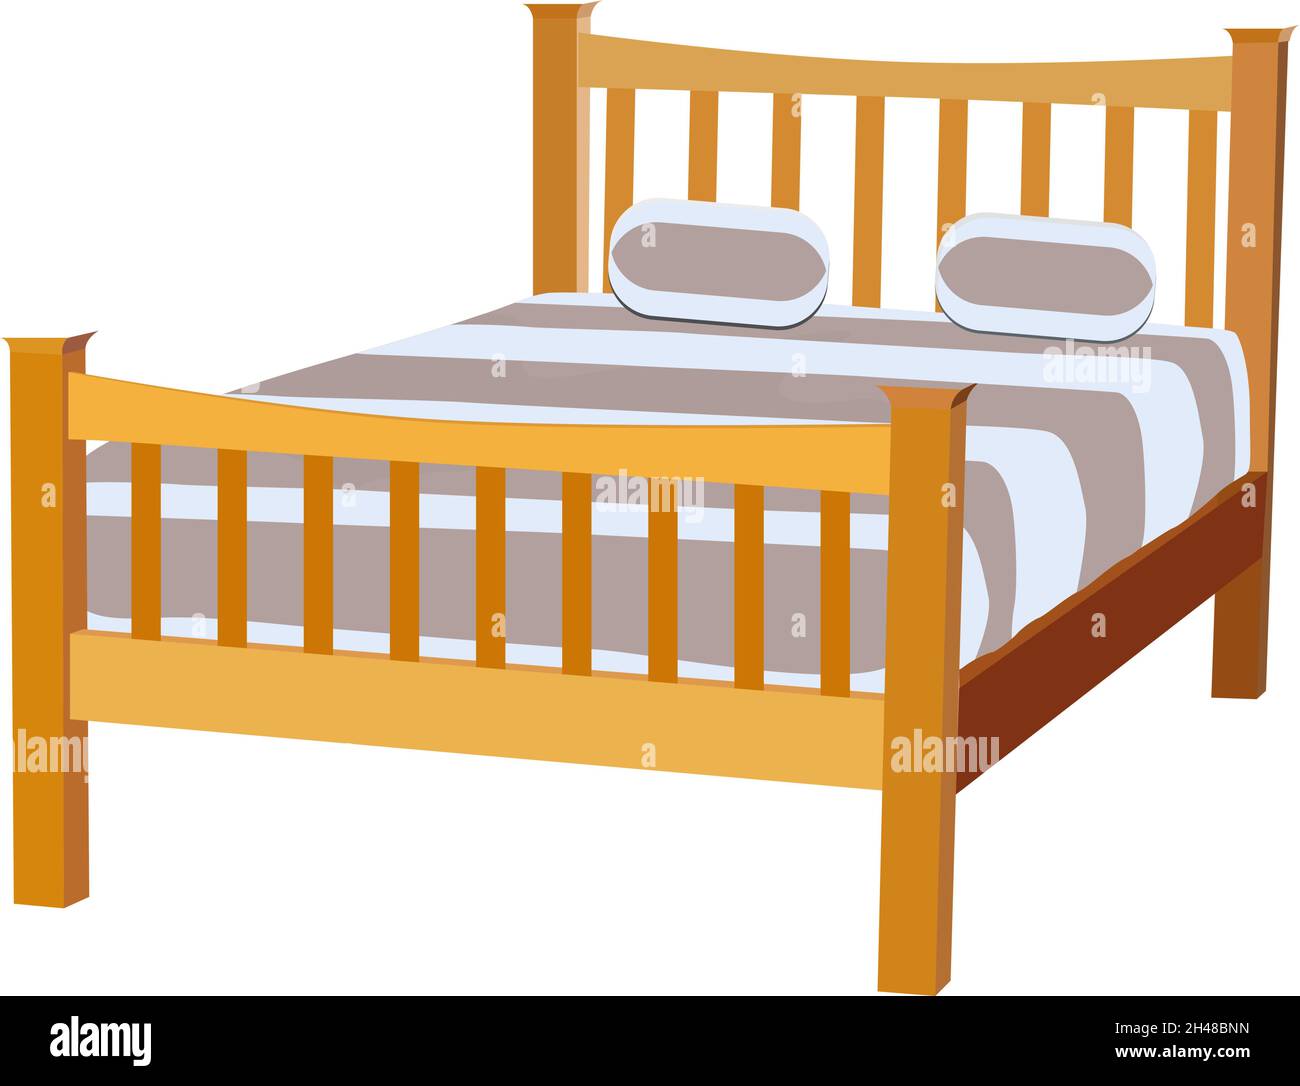 Wooden bed, illustration, vector on a white background. Stock Vector